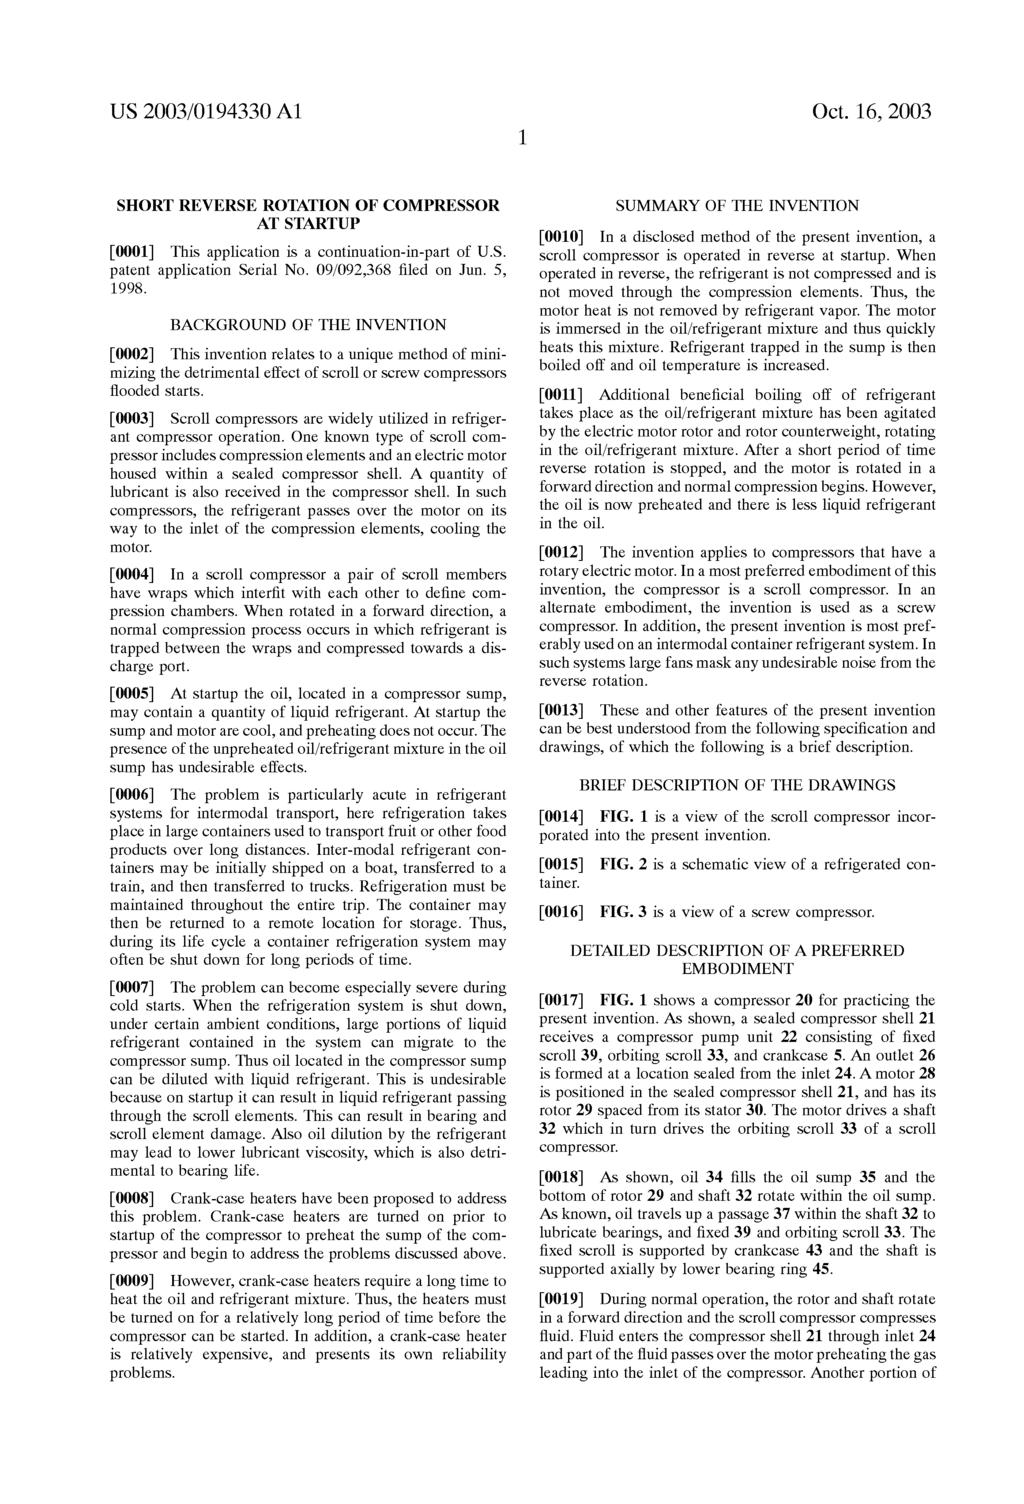 US 2003/O194330 A1 Oct. 16, 2003 SHORT REVERSE ROTATIO OF COMPRESSOR AT STARTUP 0001. This application is a continuation-in-part of U.S. patent application Serial o. 09/092,368 filed on Jun. 5, 1998.